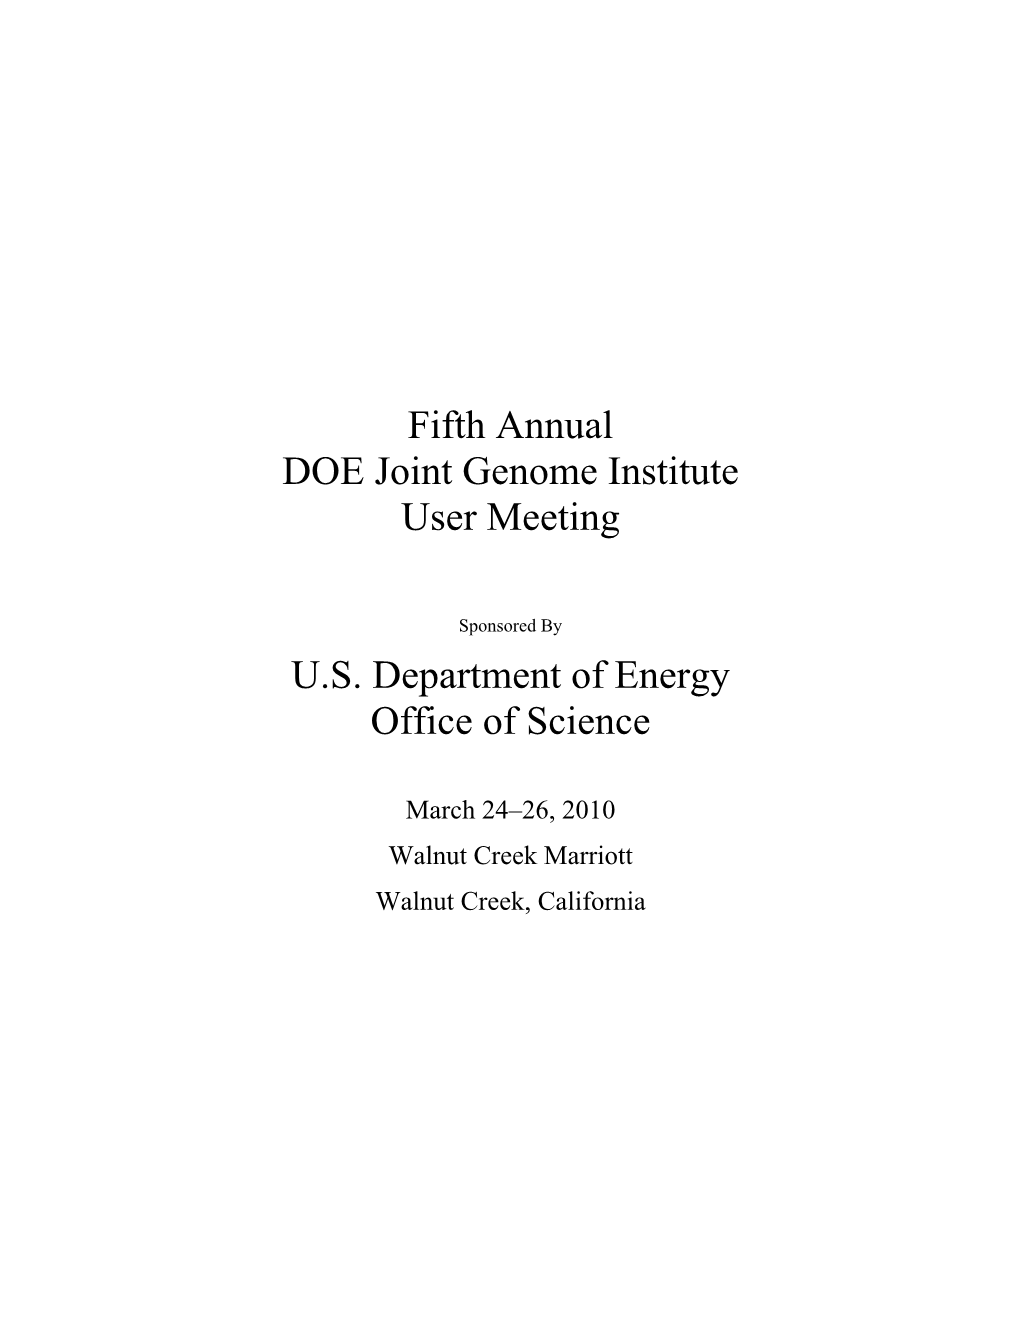 Fifth Annual DOE Joint Genome Institute User Meeting